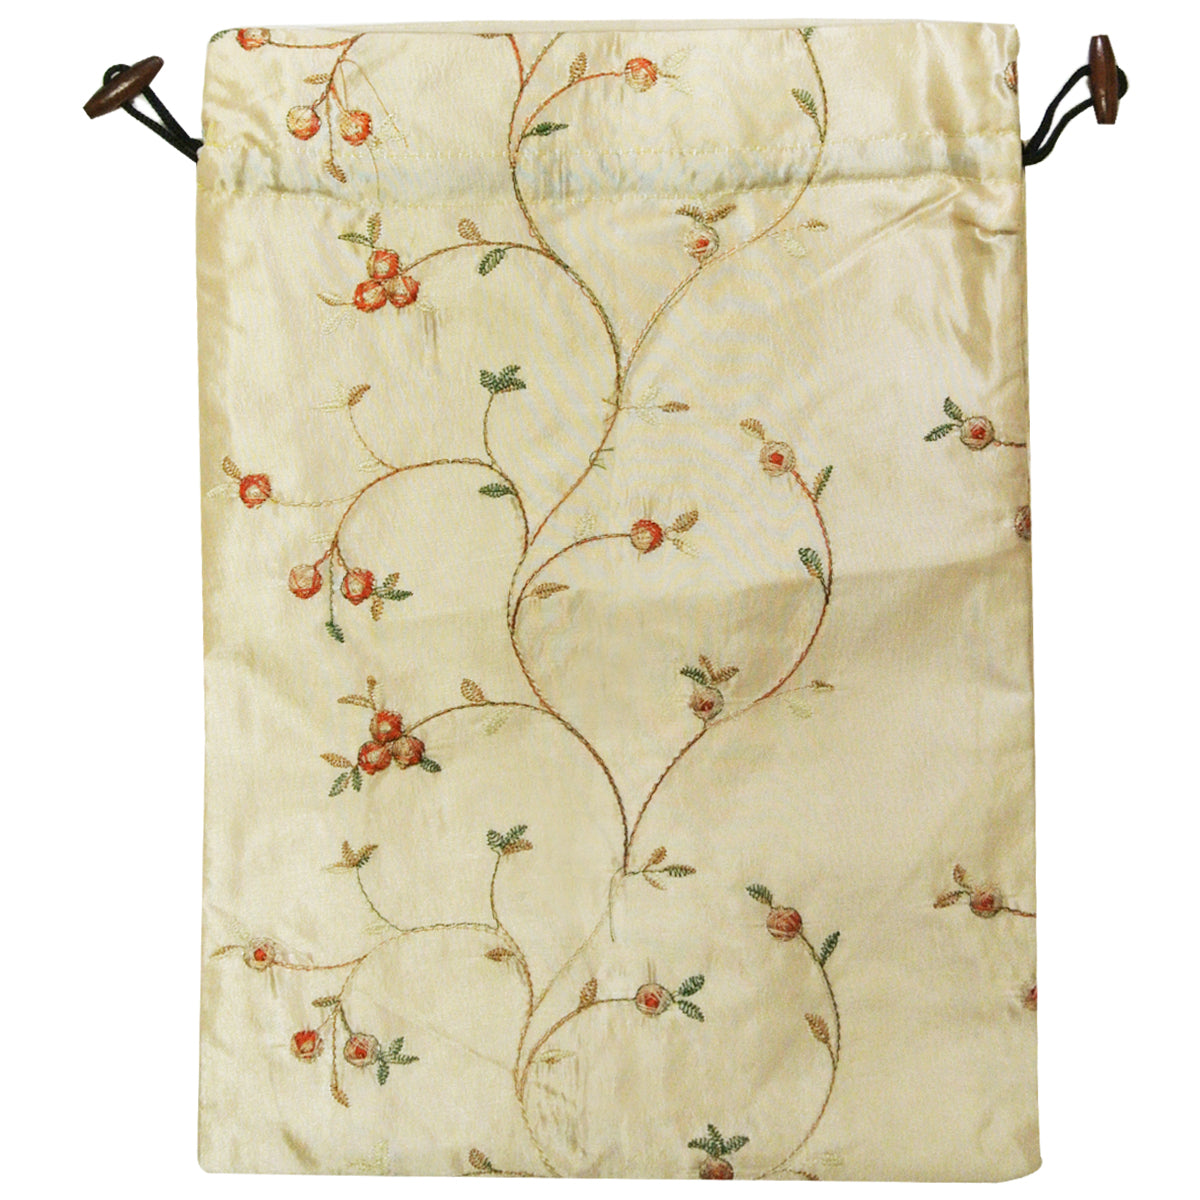 Wrapables Beautiful Embroidered Silk Travel Bag for Lingerie & Shoes